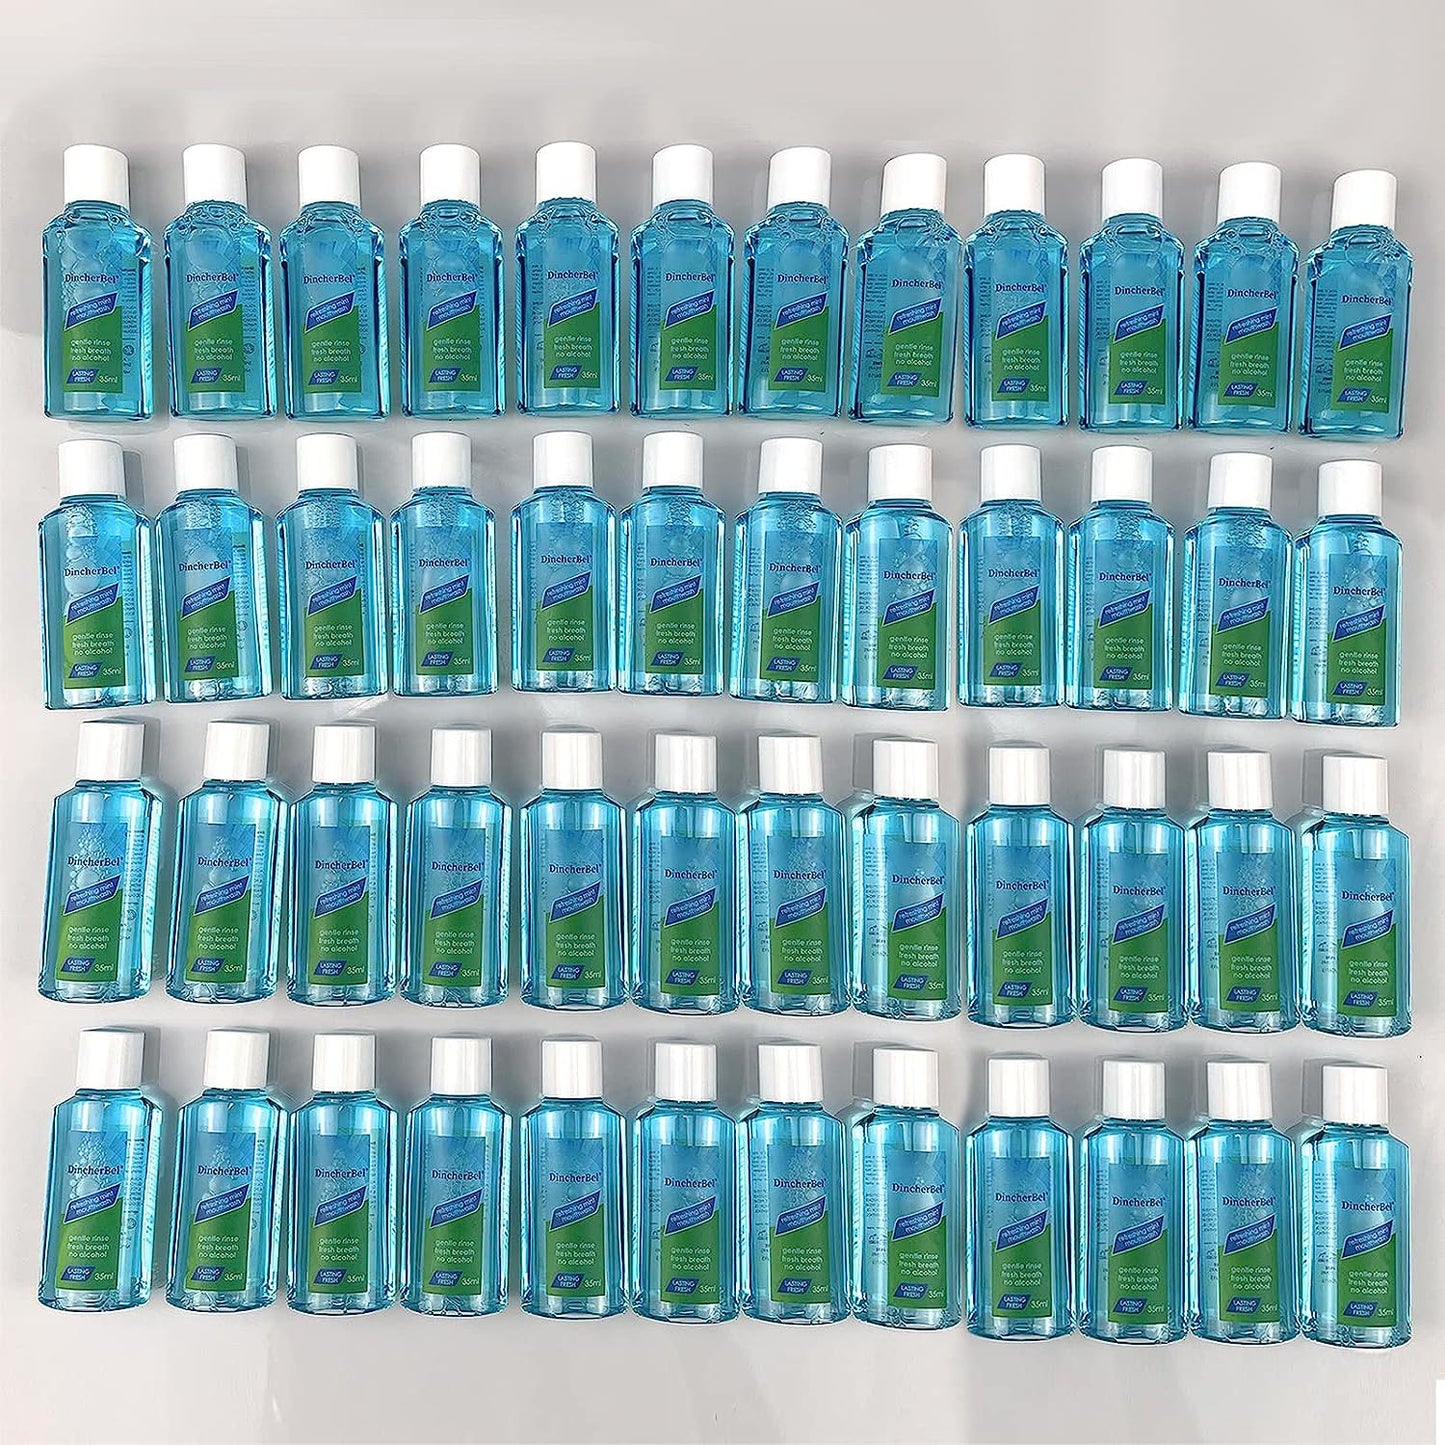 Mouthwash Travel Size Portable Refreshing Mint Mouth Rinse for Fresh Breath, Great for AirBnB, Spas, Hotels Too, 35ml/1.2oz